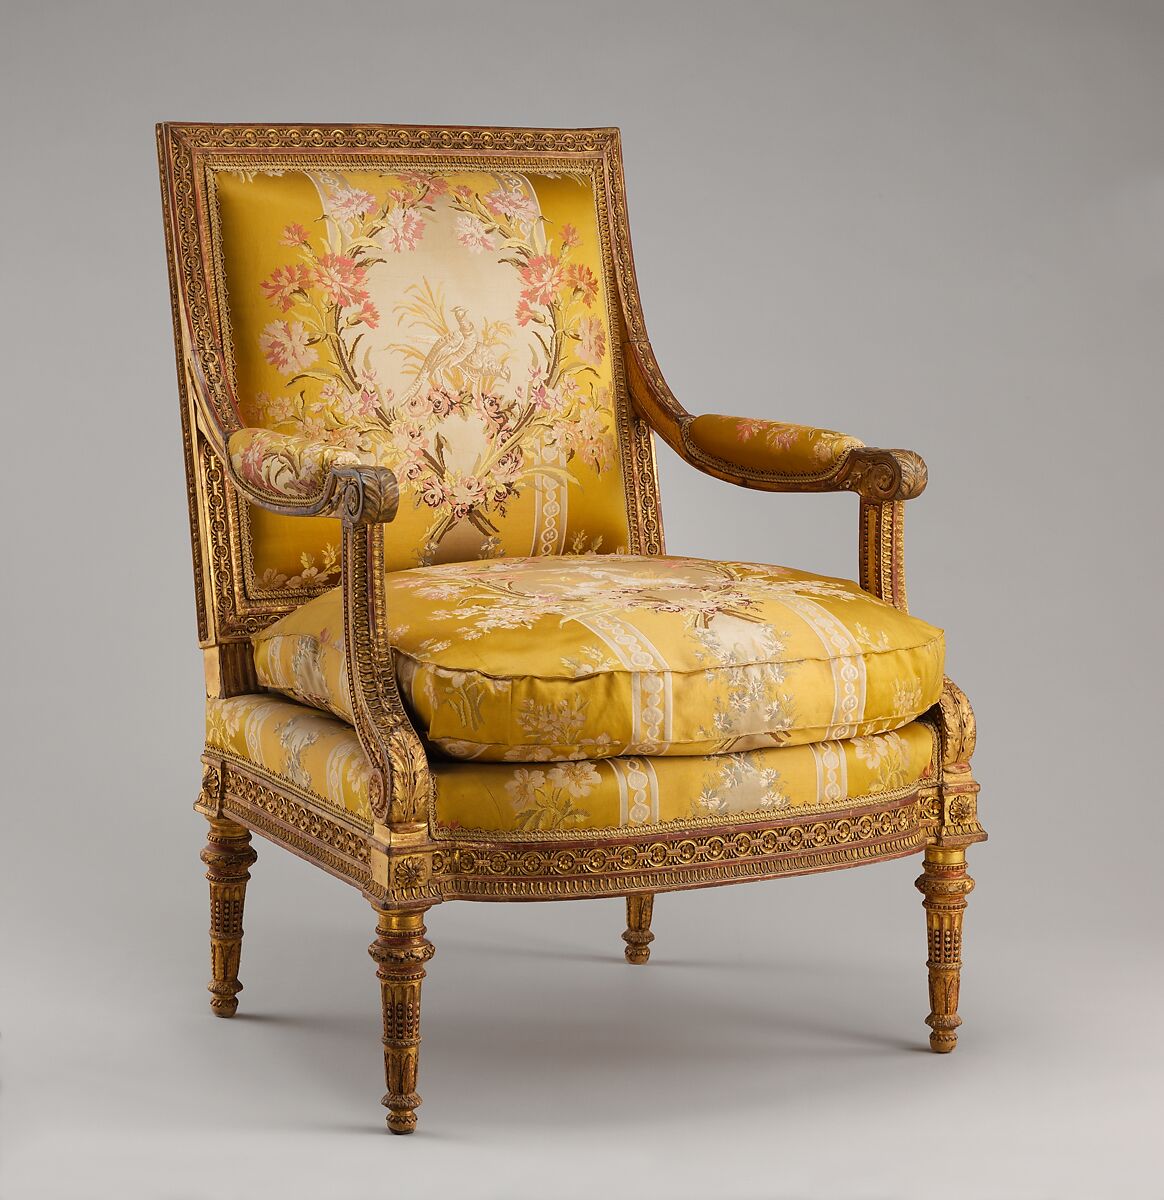 Armchair (fauteuil) from Louis XVI's Salon des Jeux at Saint Cloud, Georges Jacob (French, Cheny 1739–1814 Paris), Carved and gilded walnut; gold brocaded silk (not original), French, Paris 